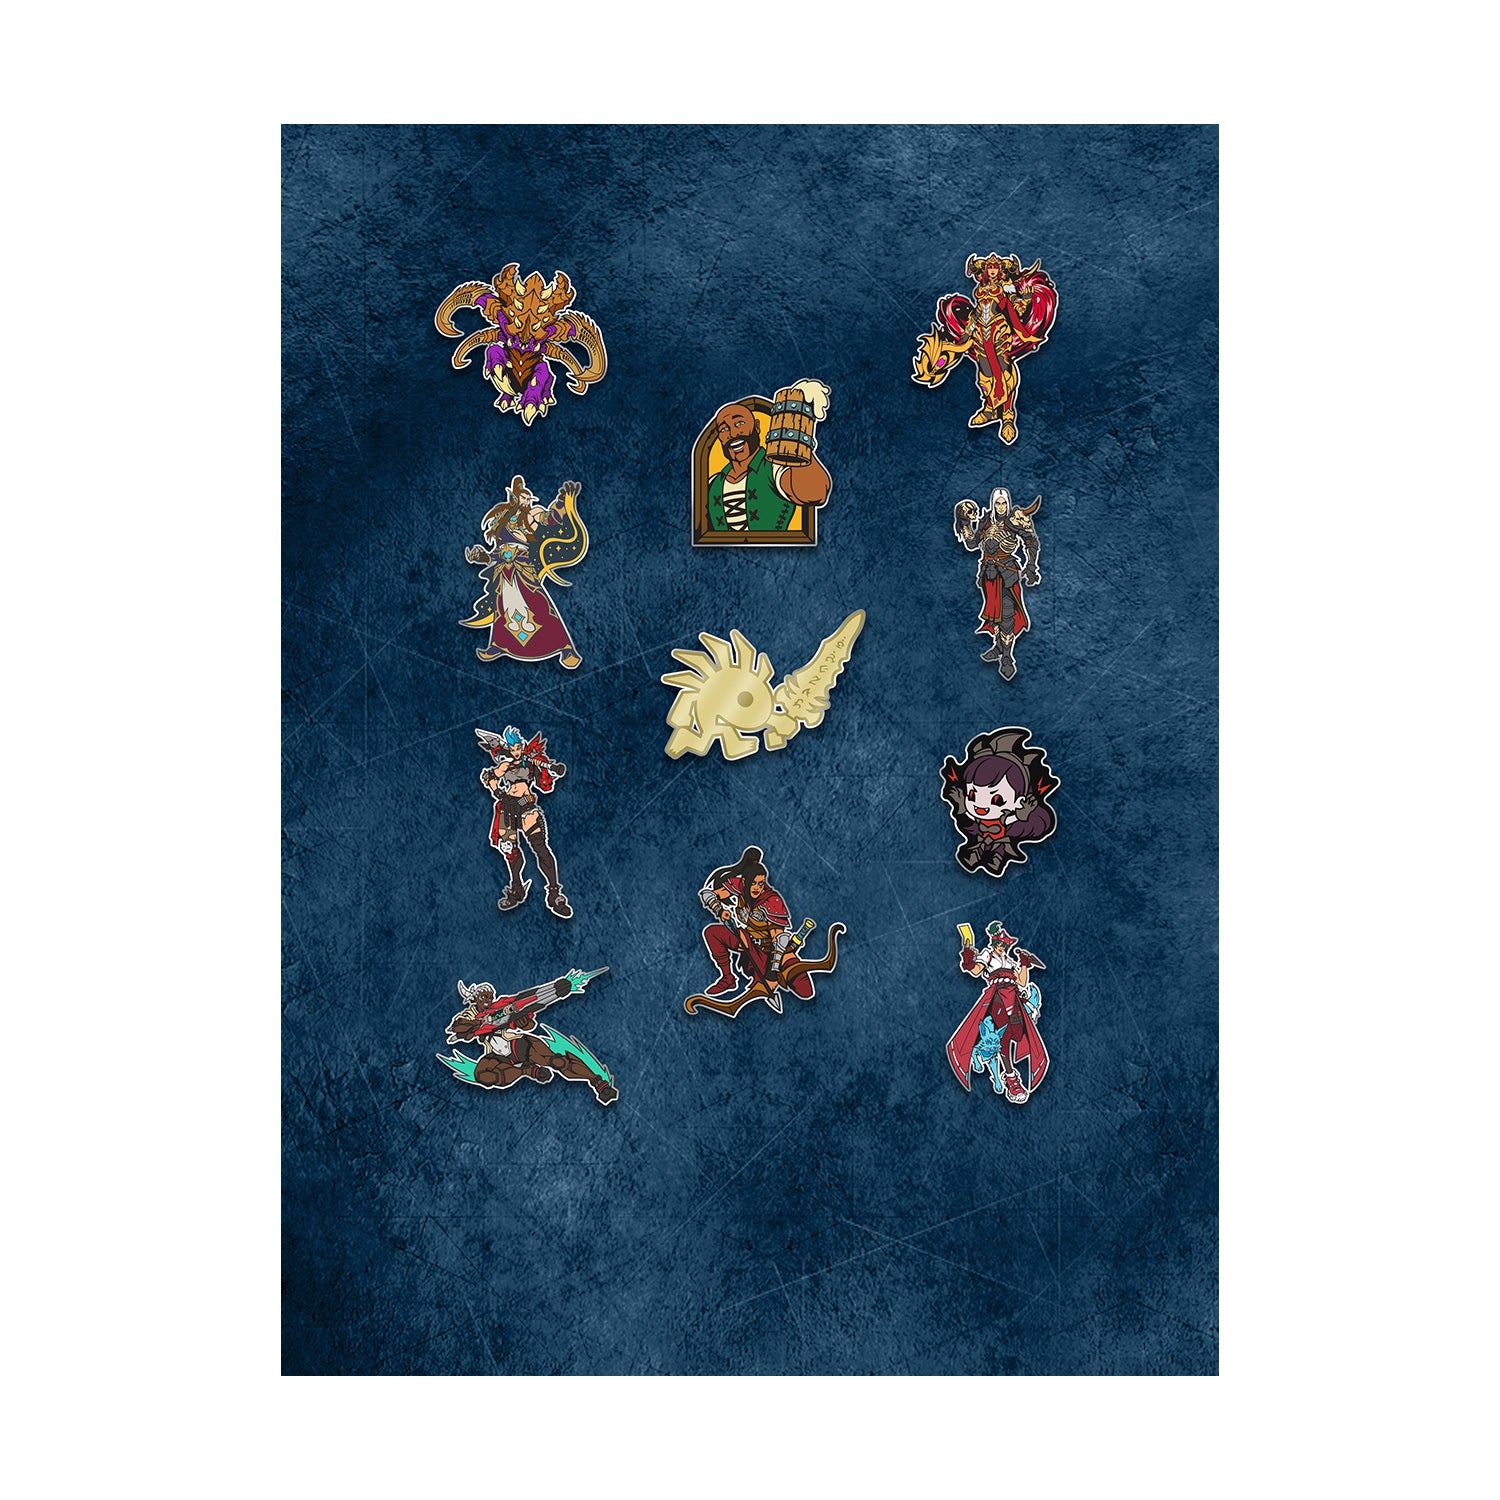 Blizzard Series 9 Collector's Edition Pin Set - Close Up View